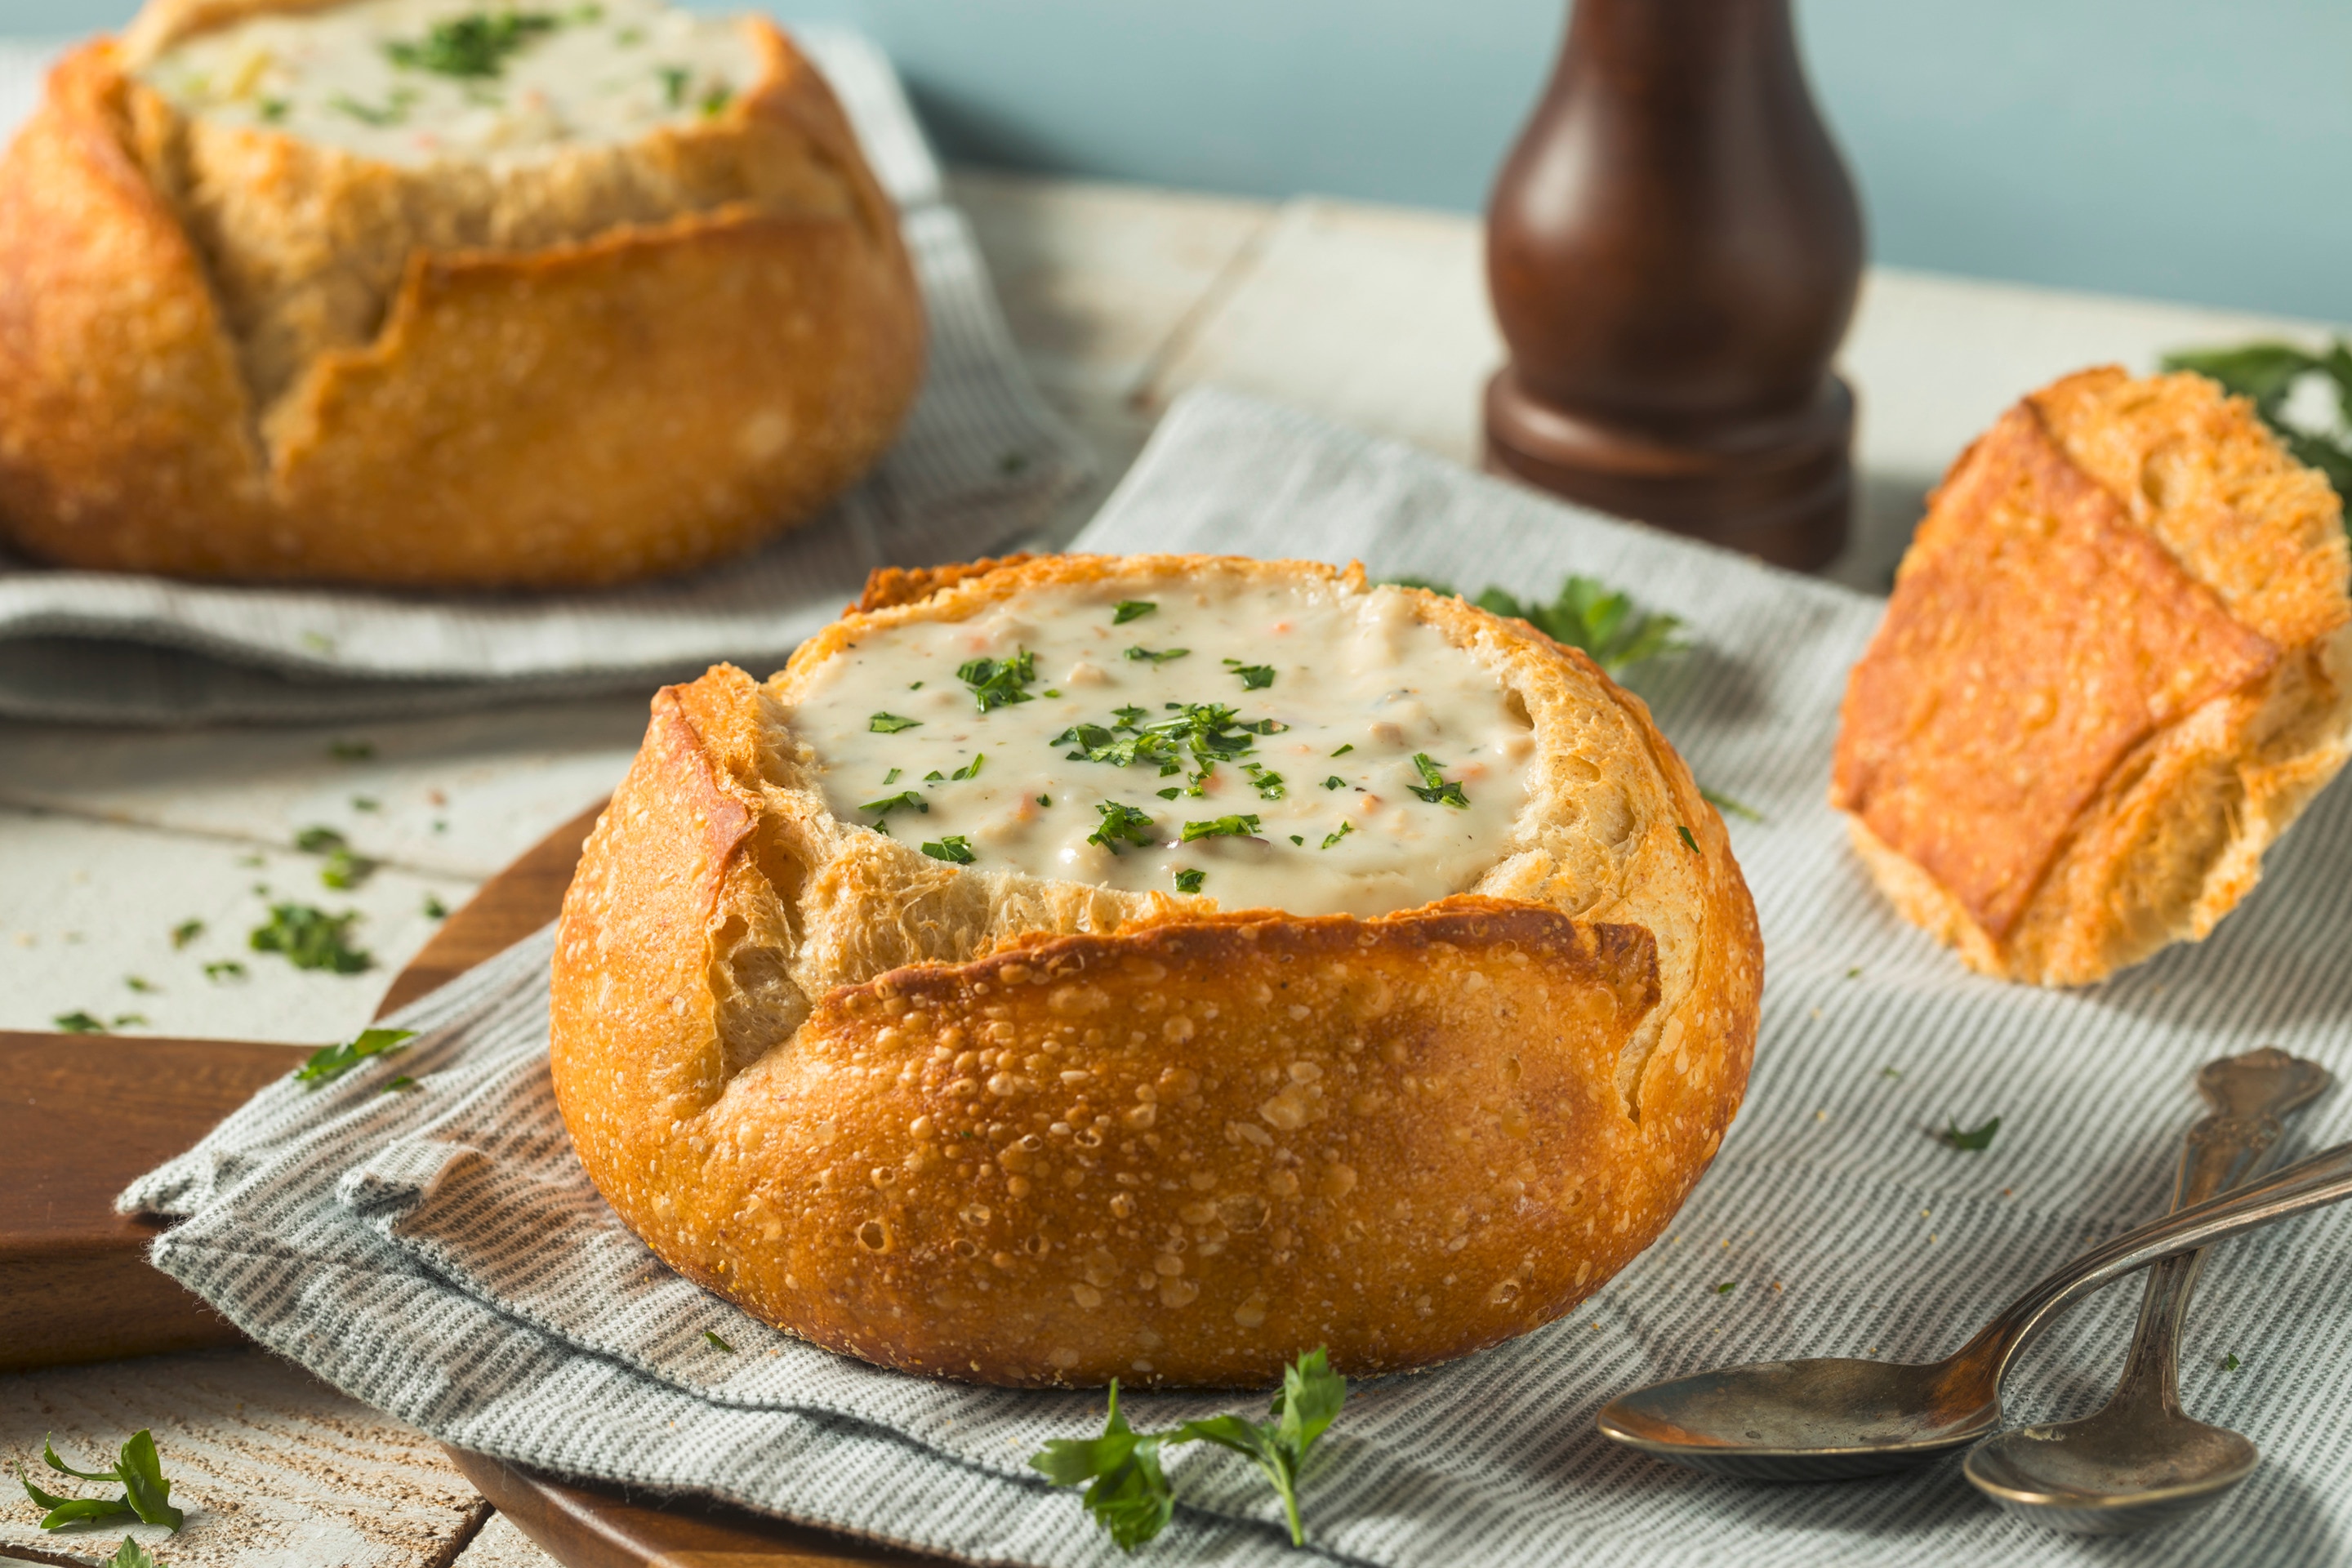 New England clam chowder served in a sourdough bread bowl